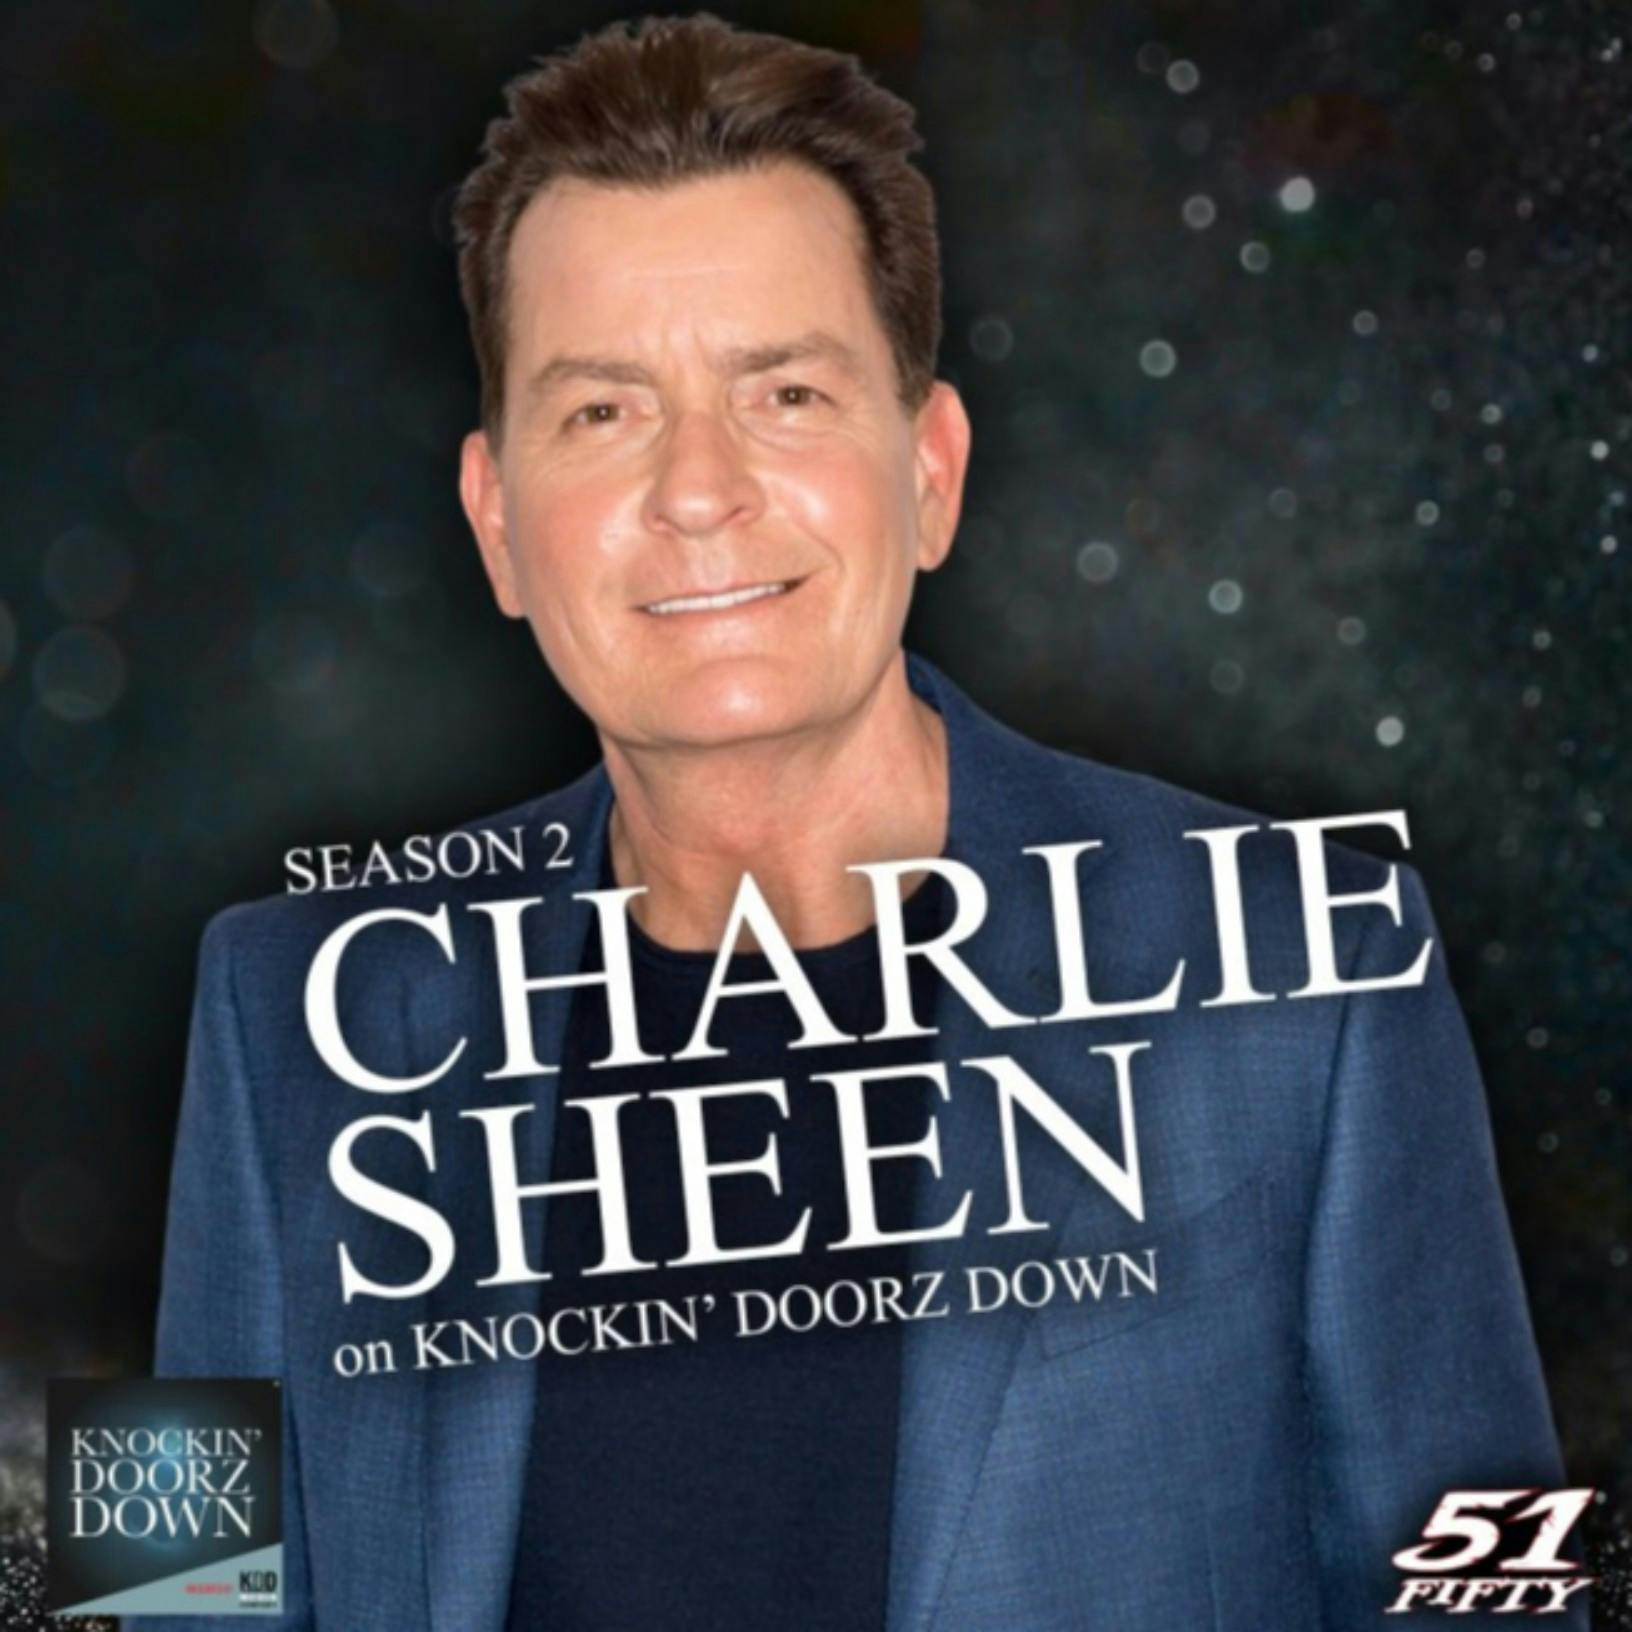 Charlie Sheen | Part 2 of his Revealing Interview:  Discussing His HIV Diagnosis, His Sobriety, Stories from the Sets of Some of His Biggest Films, And Being the Best Dad He Can Be